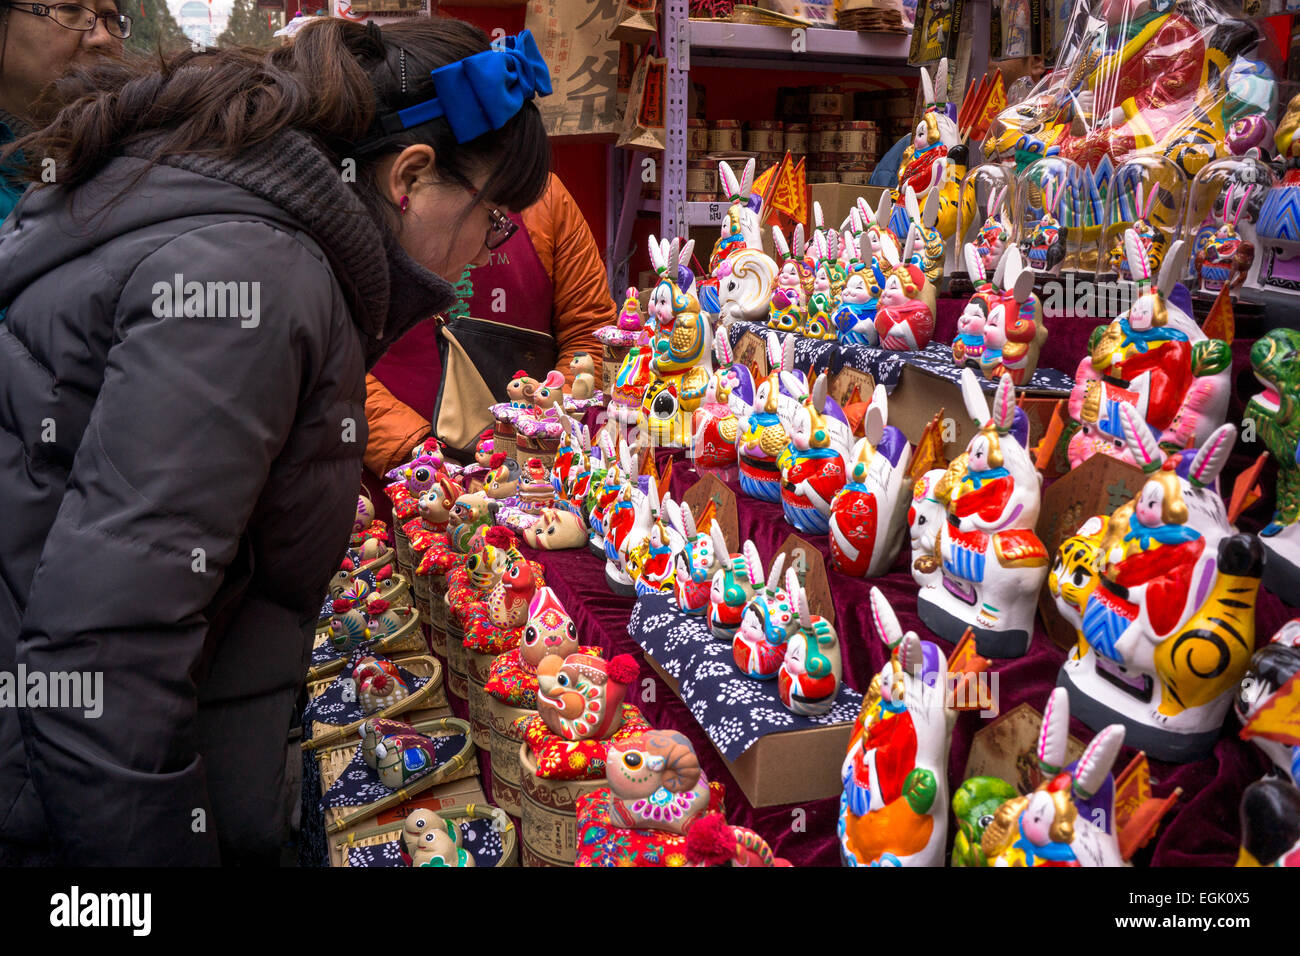 Tourist visit a traditional clay handicrafts stall in Beijing Ditan temple fair. Stock Photo